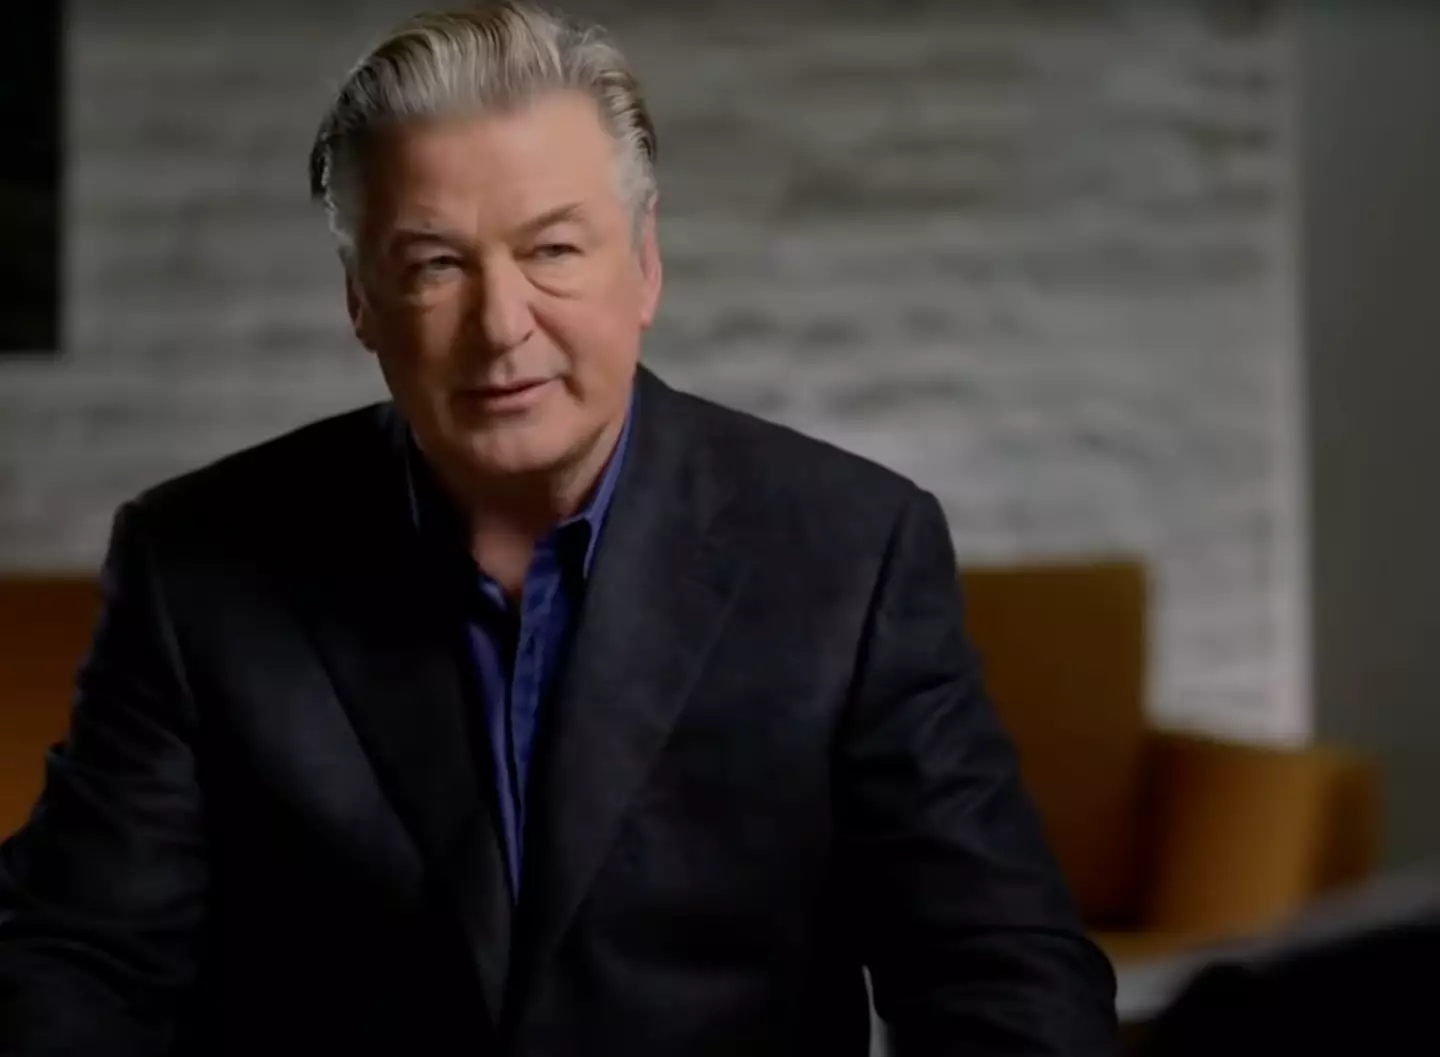 Alec Baldwin is set to resume filming Rust after the fatal on-set shooting of cinematographer Halyna Hutchins in October 2021.